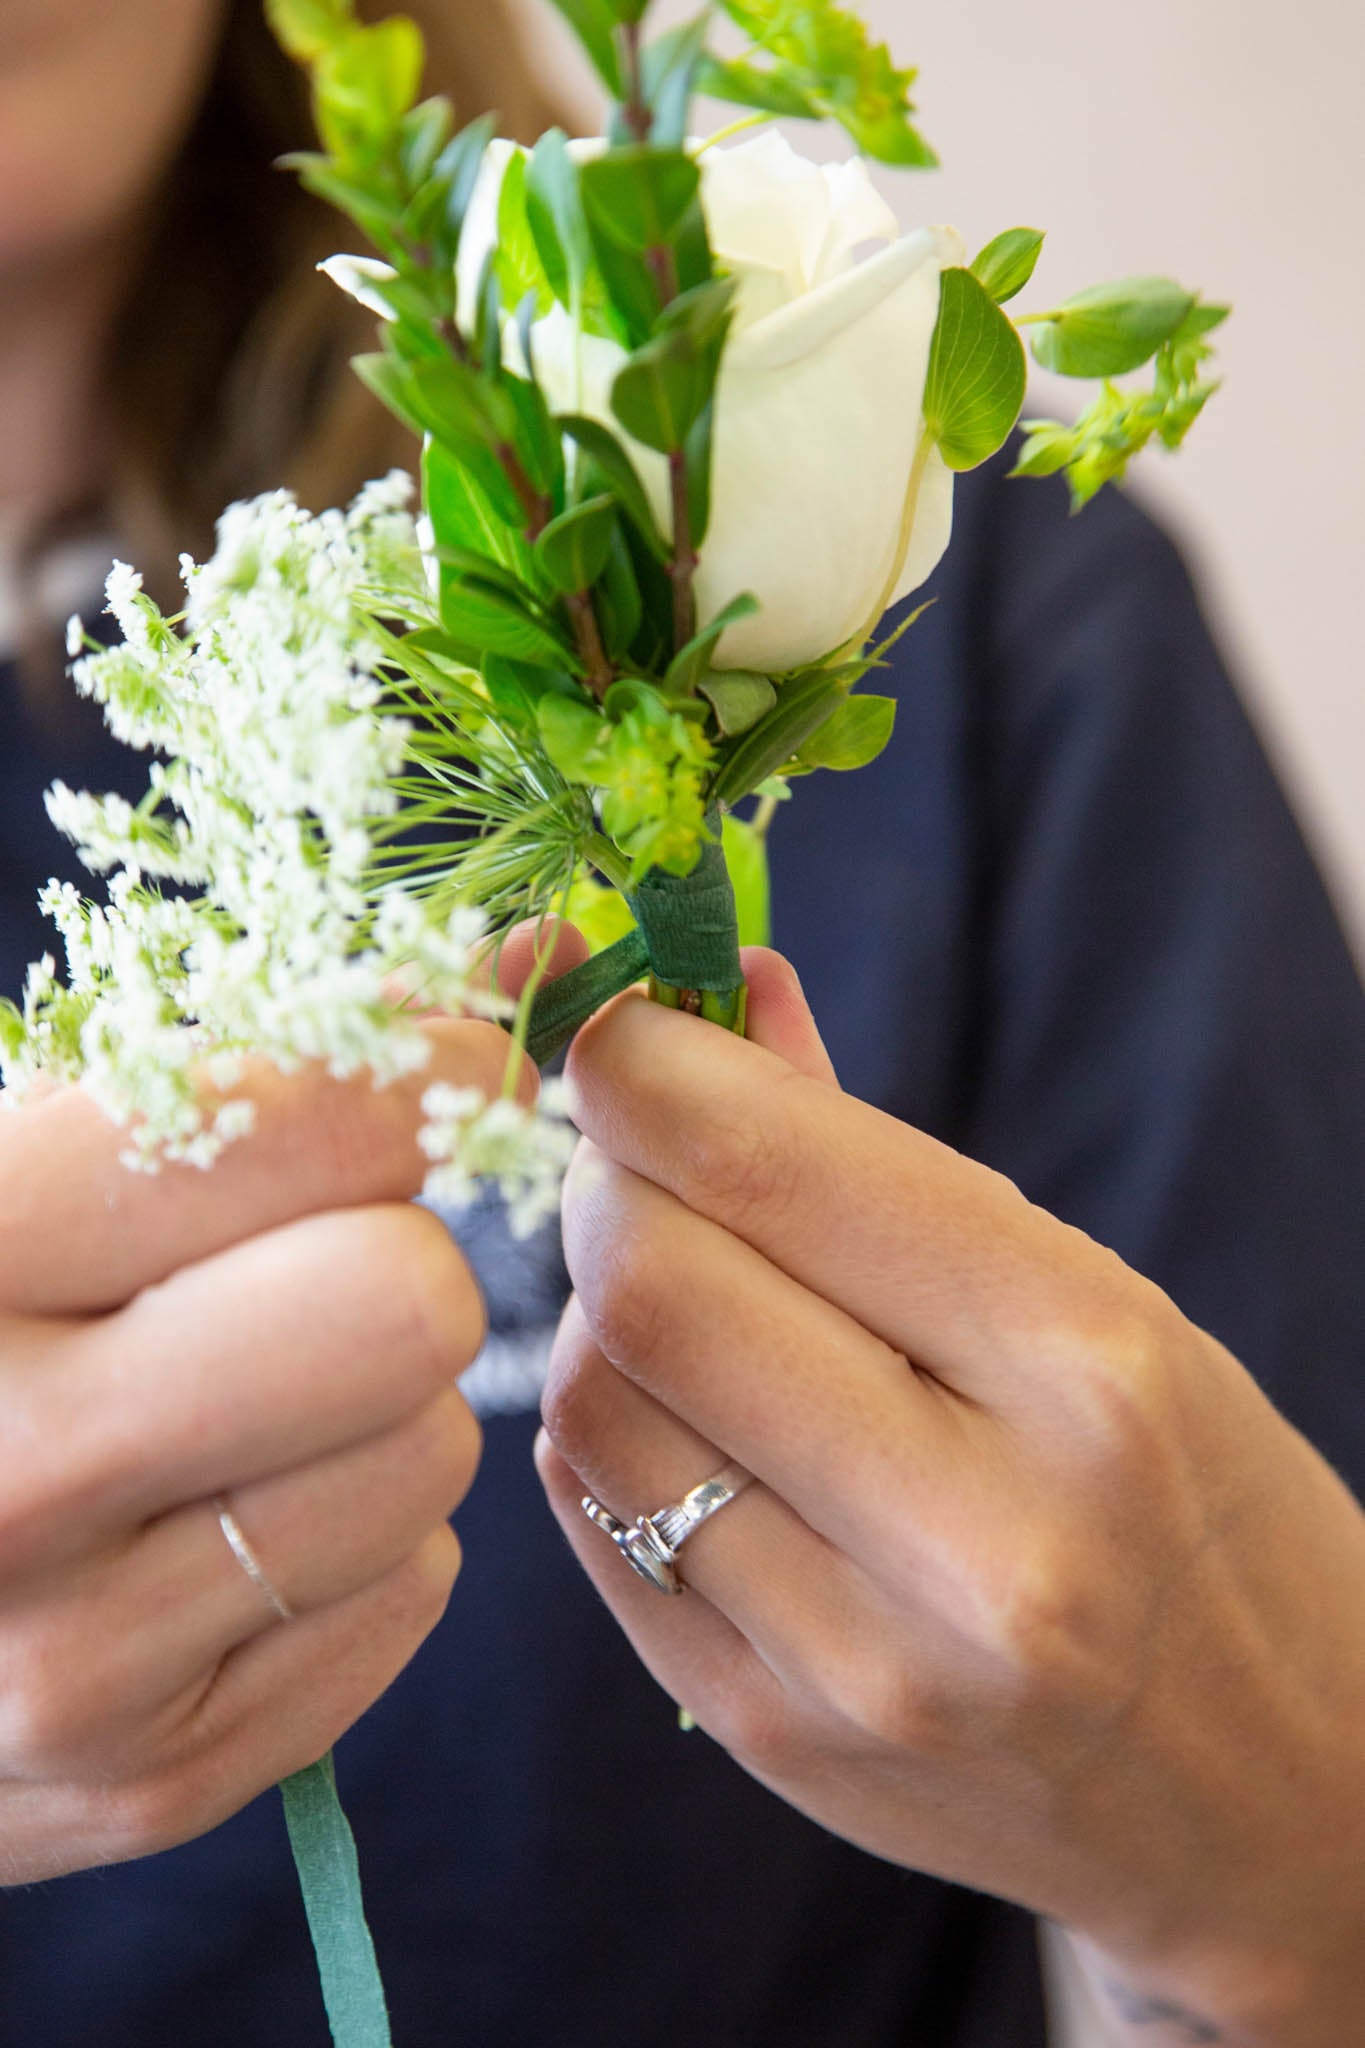 Secure the stems of your corsage together with tape